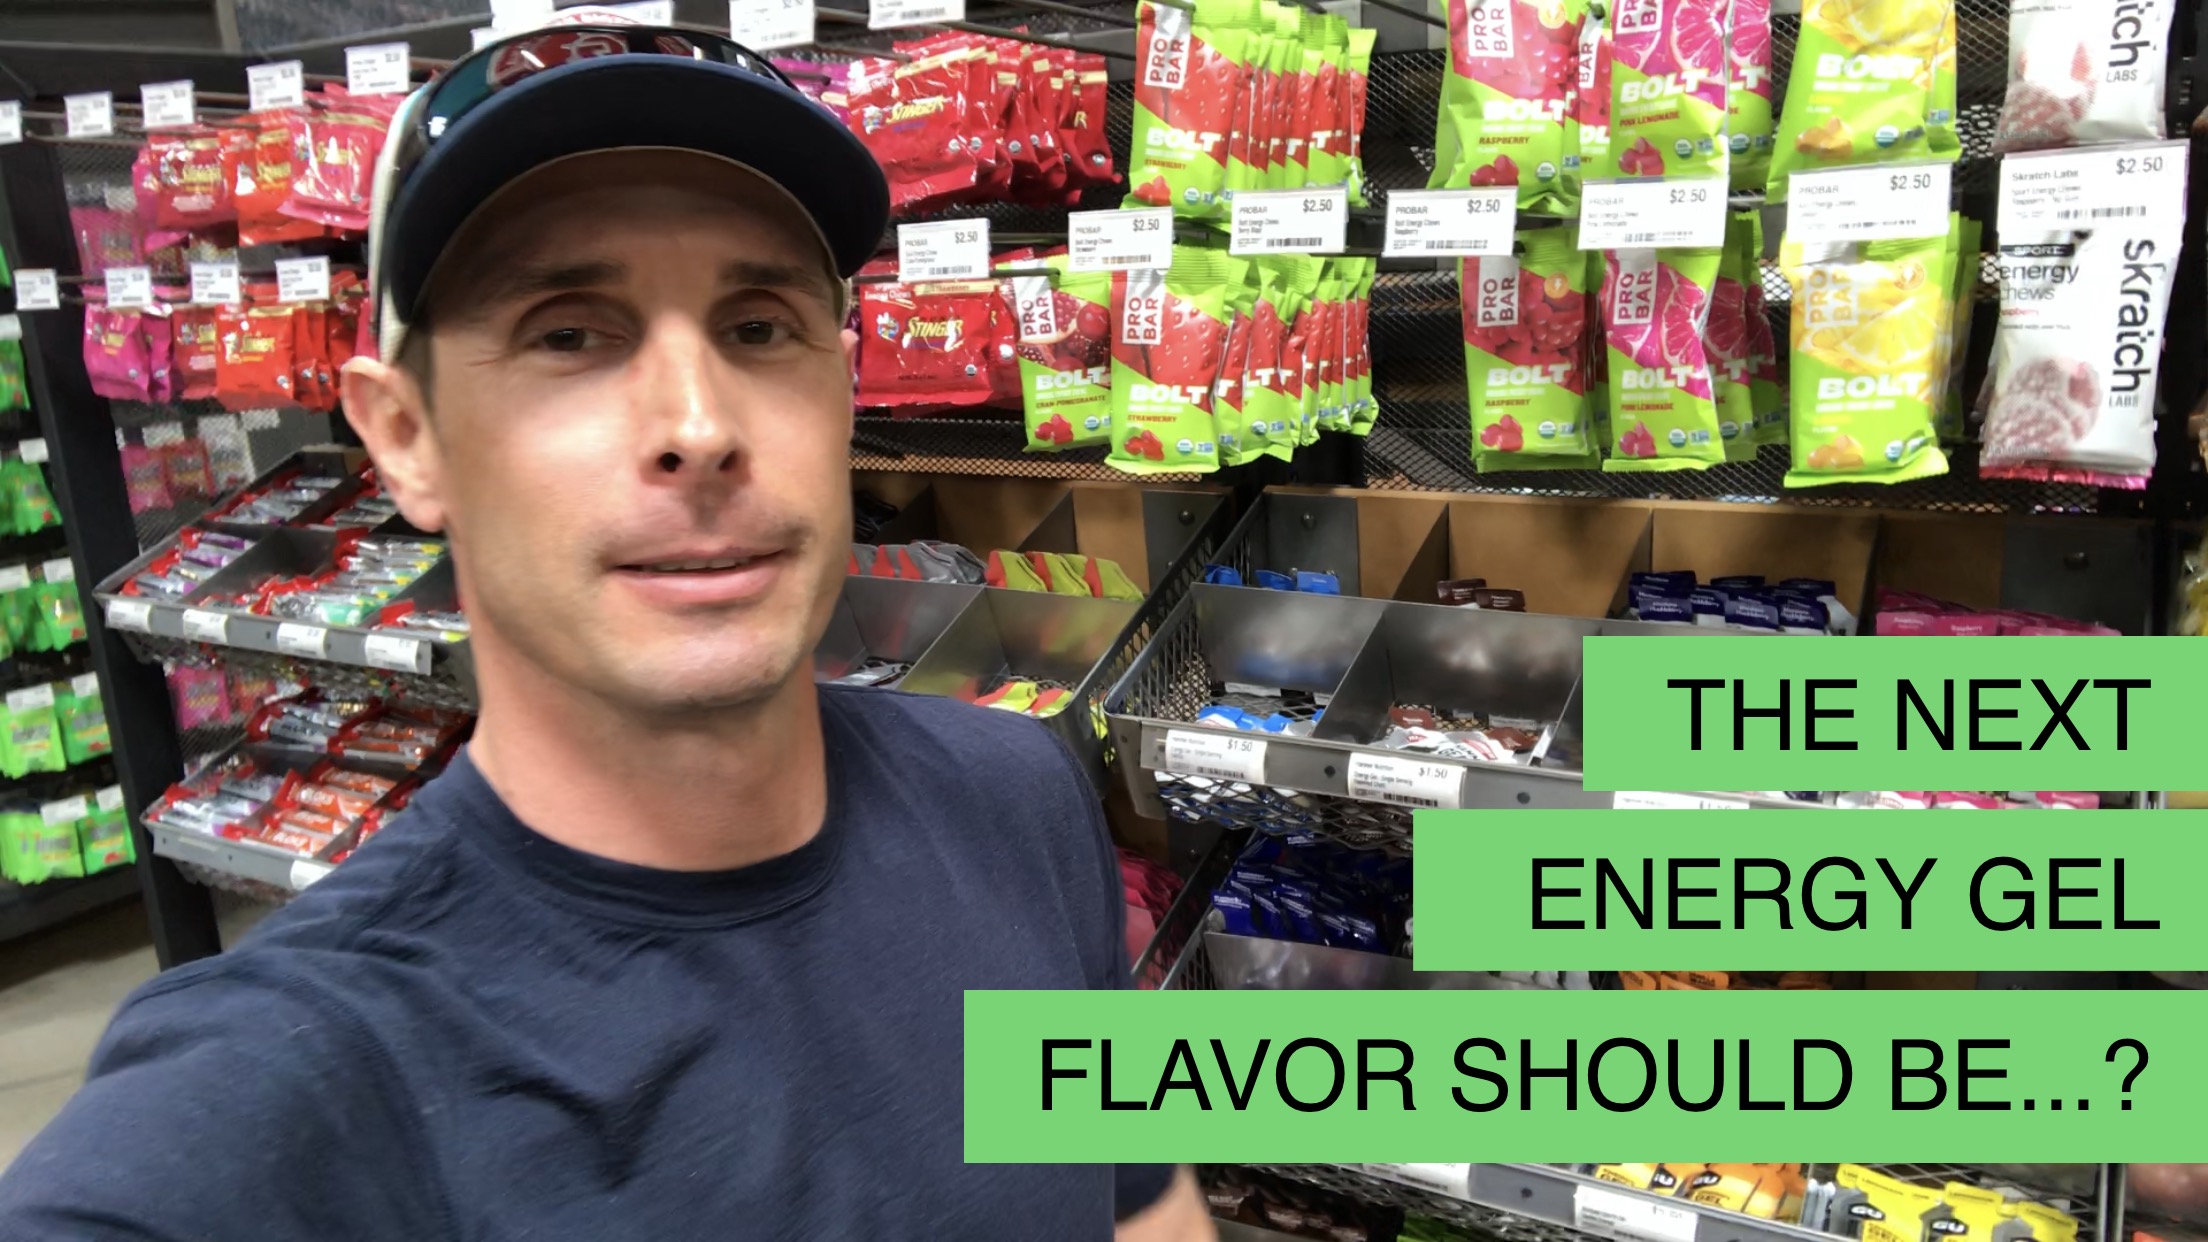 The next energy gel flavor should be…?